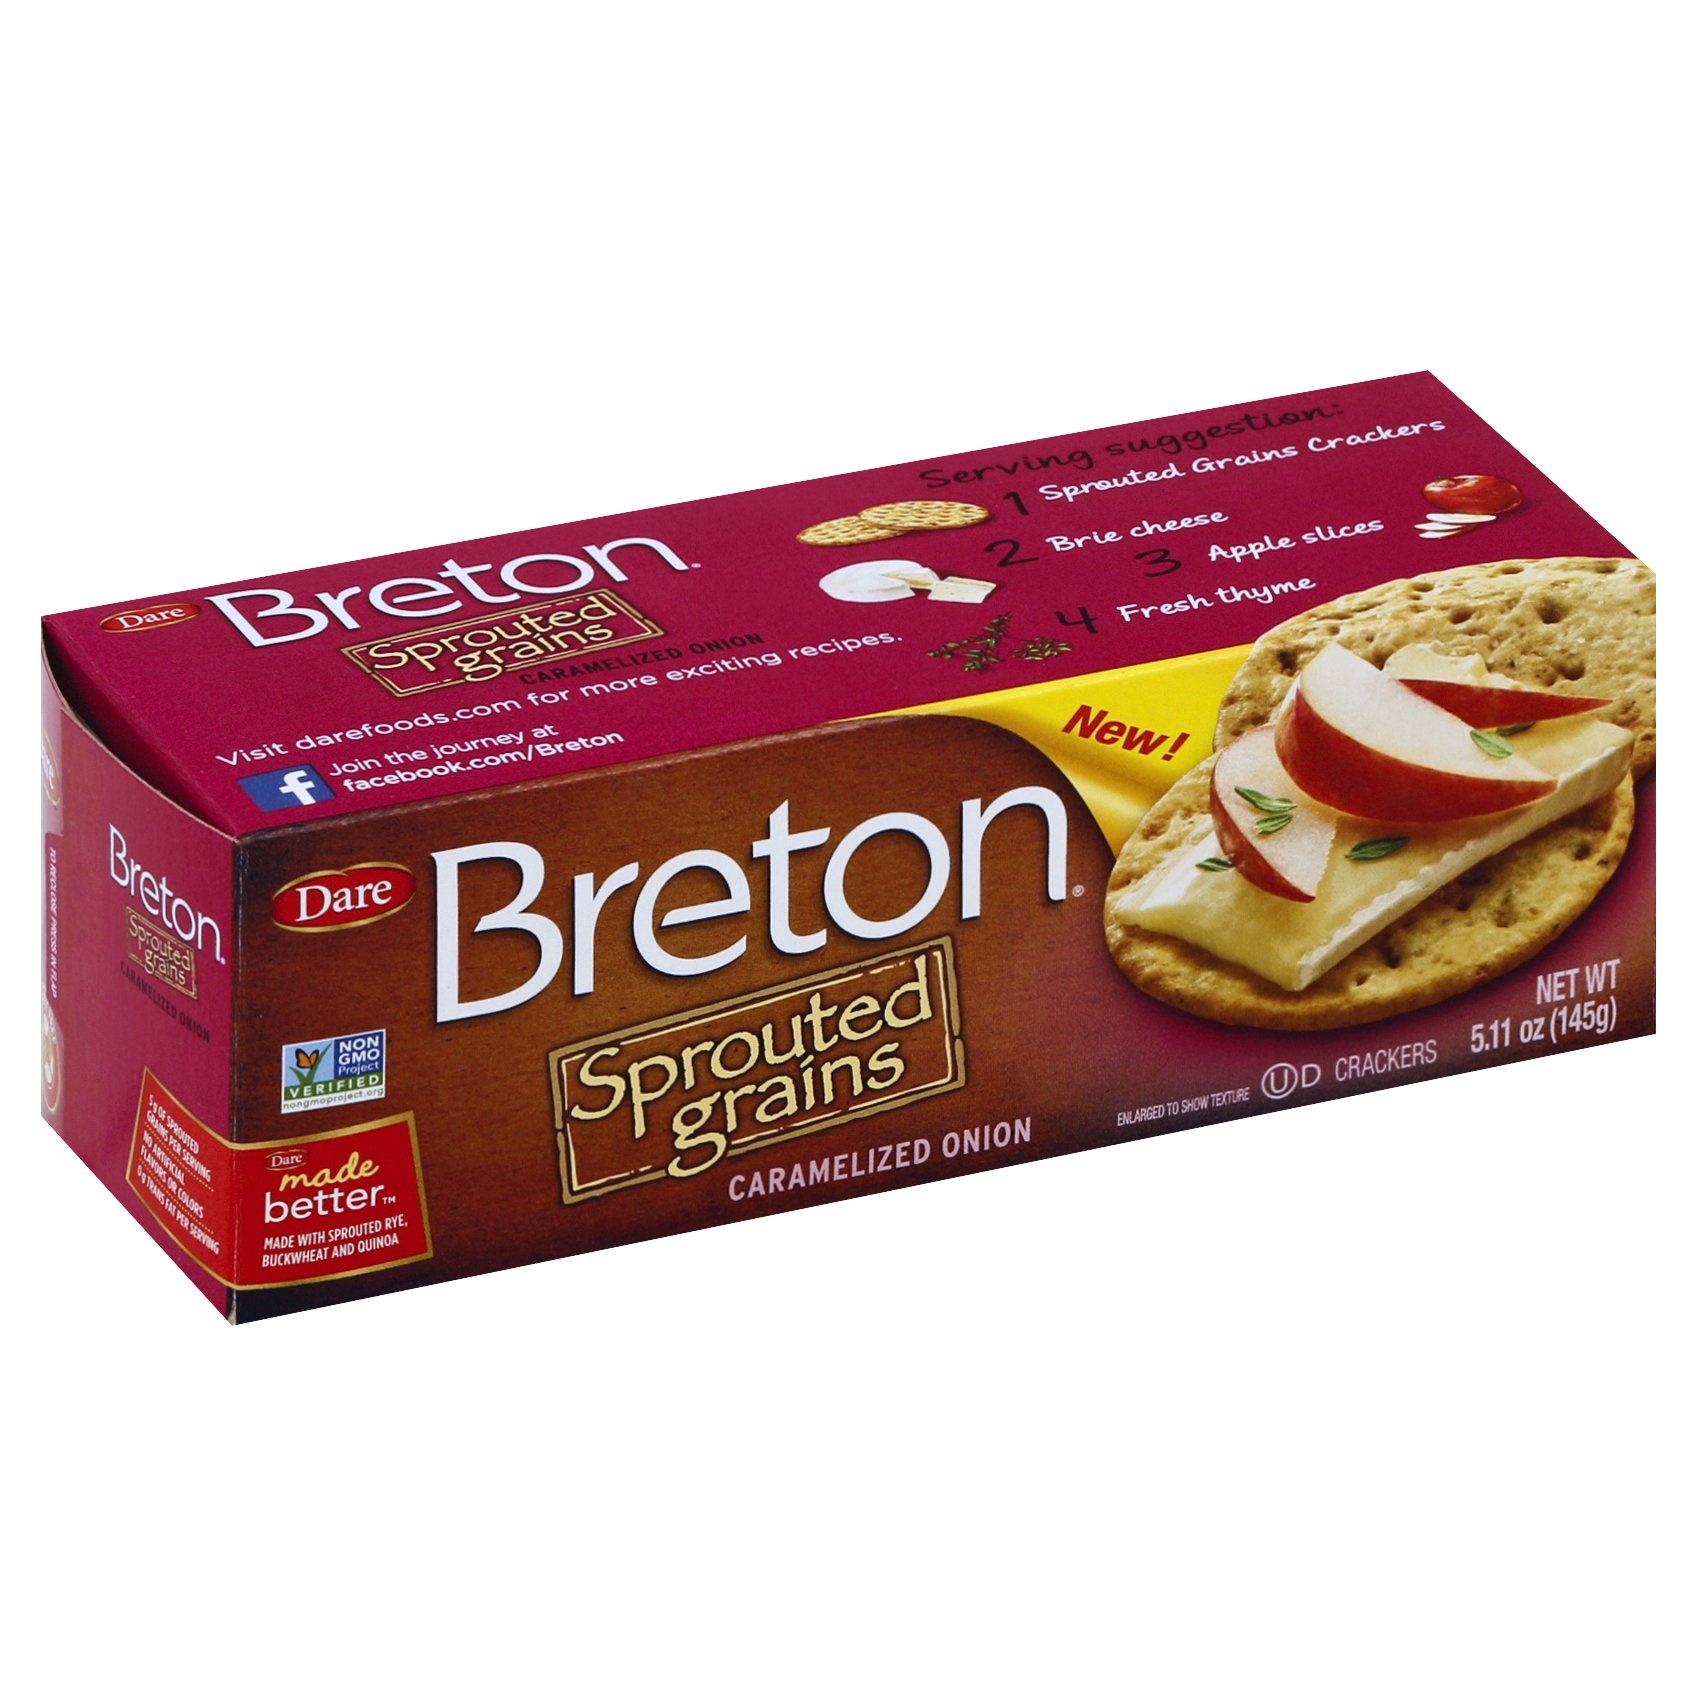 slide 1 of 1, Dare Breton Sprouted Grains Caramelized Onion Crackers, 5.11 oz